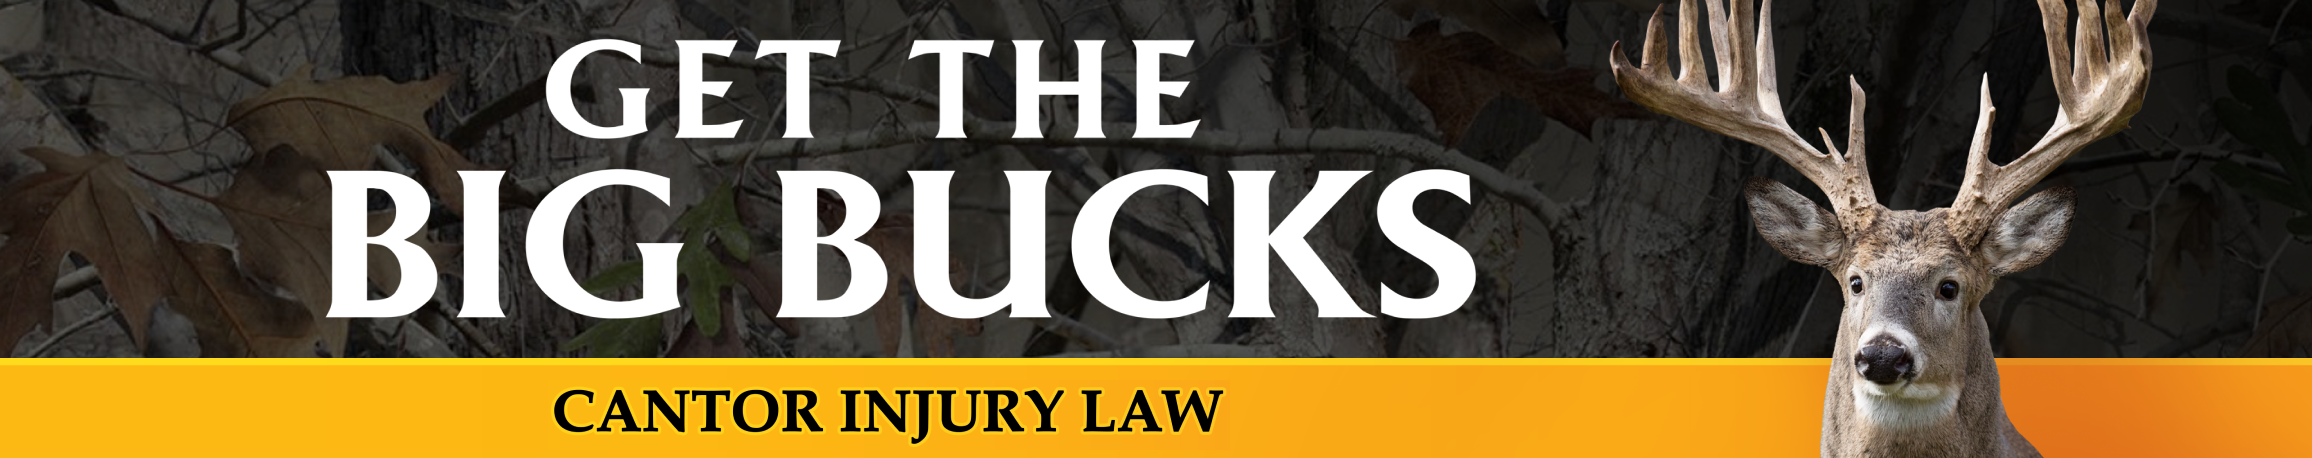 Get the big bucks at Cantor Injury Law